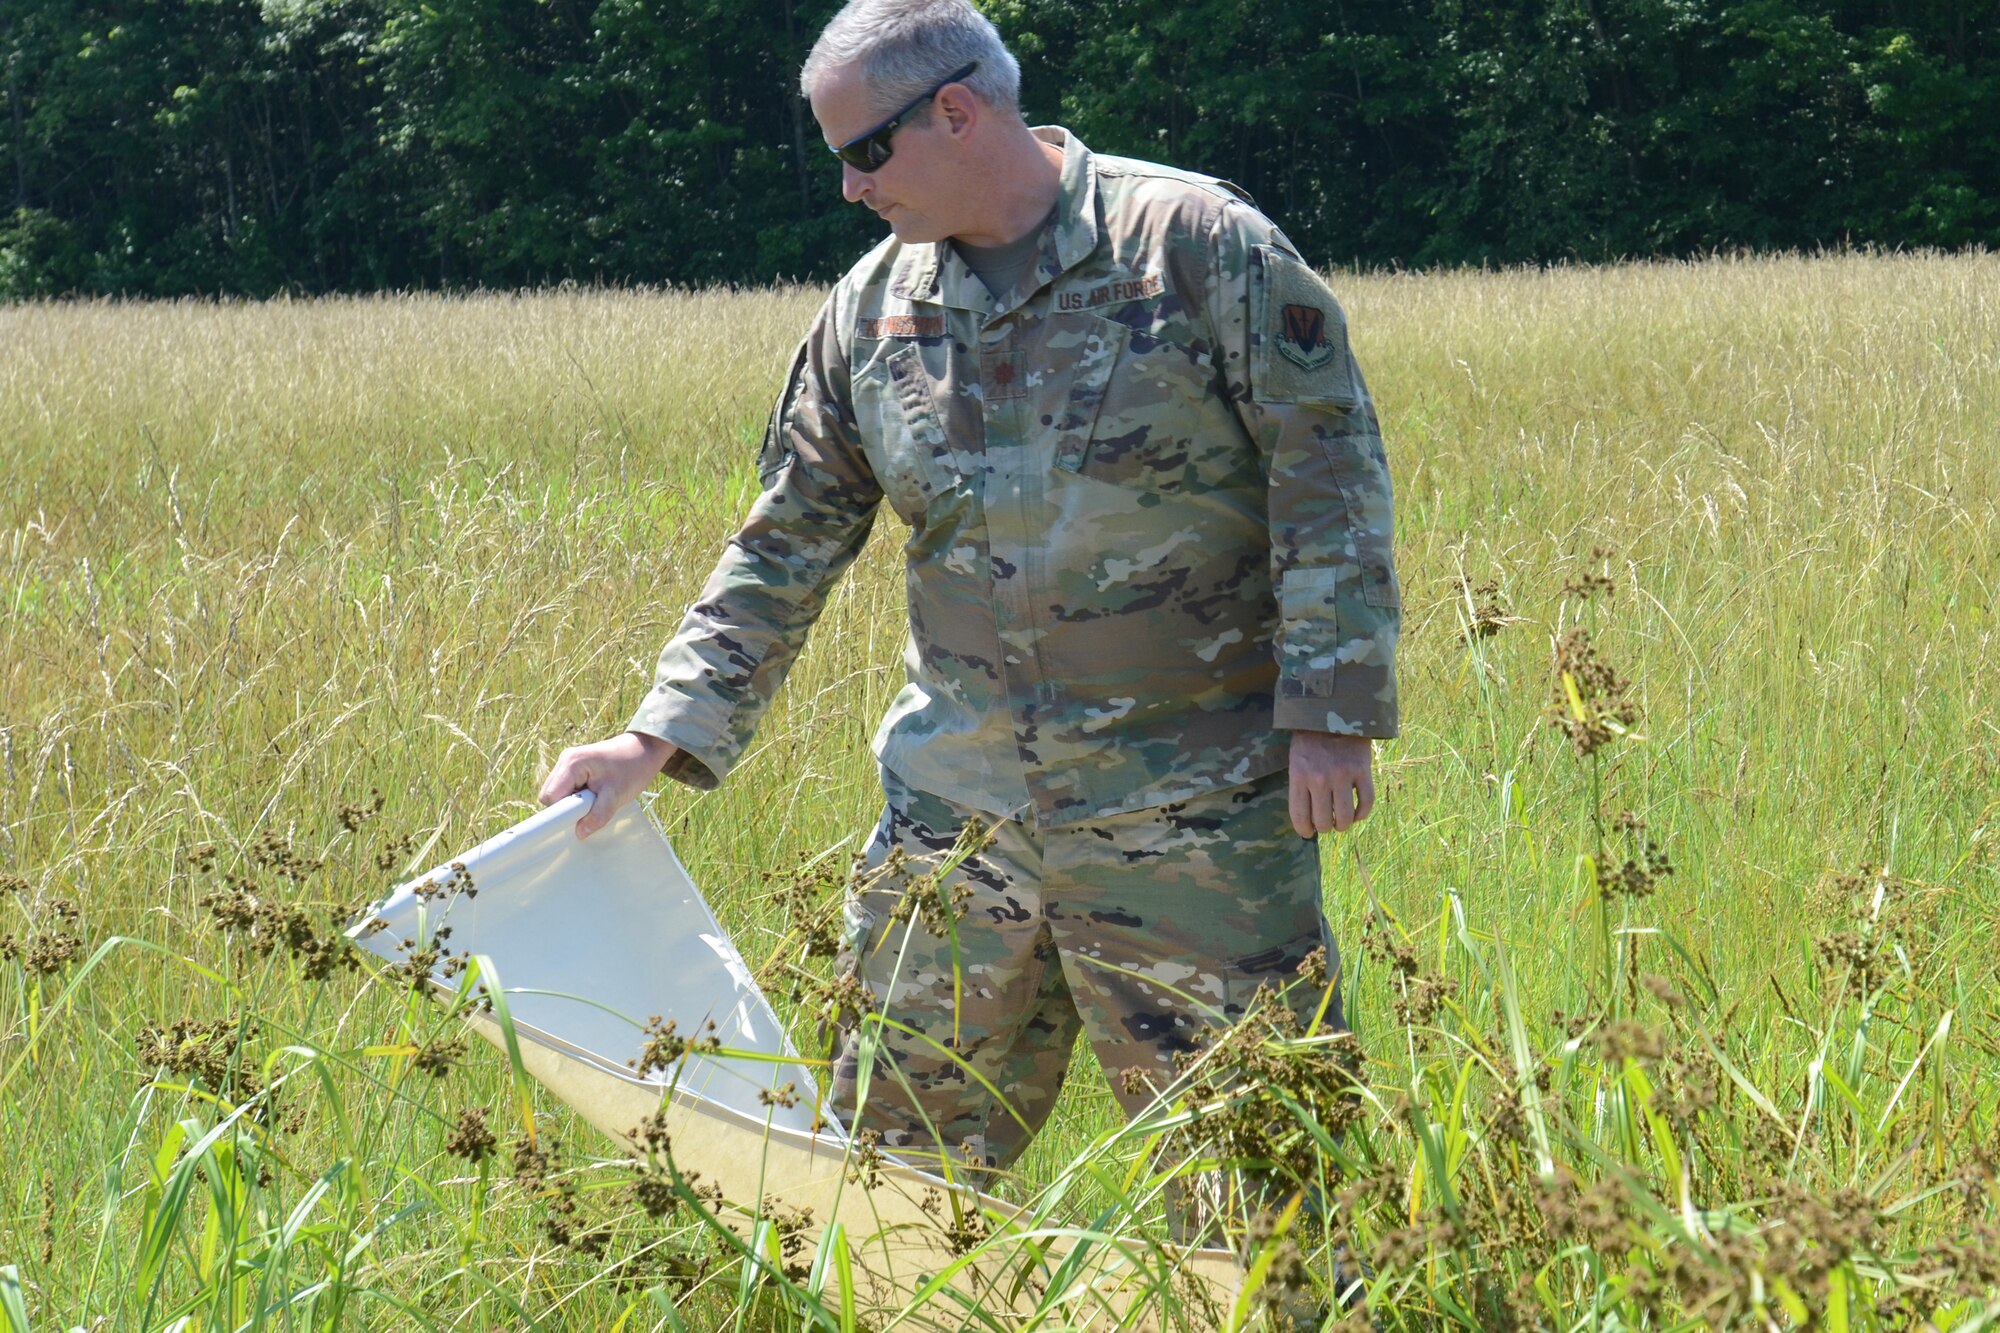 U.S. Air Force Maj. Mike Klingshirn, assigned to the 169th Fighter Wing, McEntire Joint National Guard Base, South Carolina, supports Operation Healthy Delta, a Department of Defense sponsored Innovative Readiness Training program designed to provide military training opportunities by providing key services to local citizens. Klingshirn is conducting a tick drag for vector control at Massac County High School, Metropolis, Illinois June 16, 2021. (U.S. Air National Guard photo by Lt. Col. Jim St.Clair, 169th Fighter Wing Public Affairs)